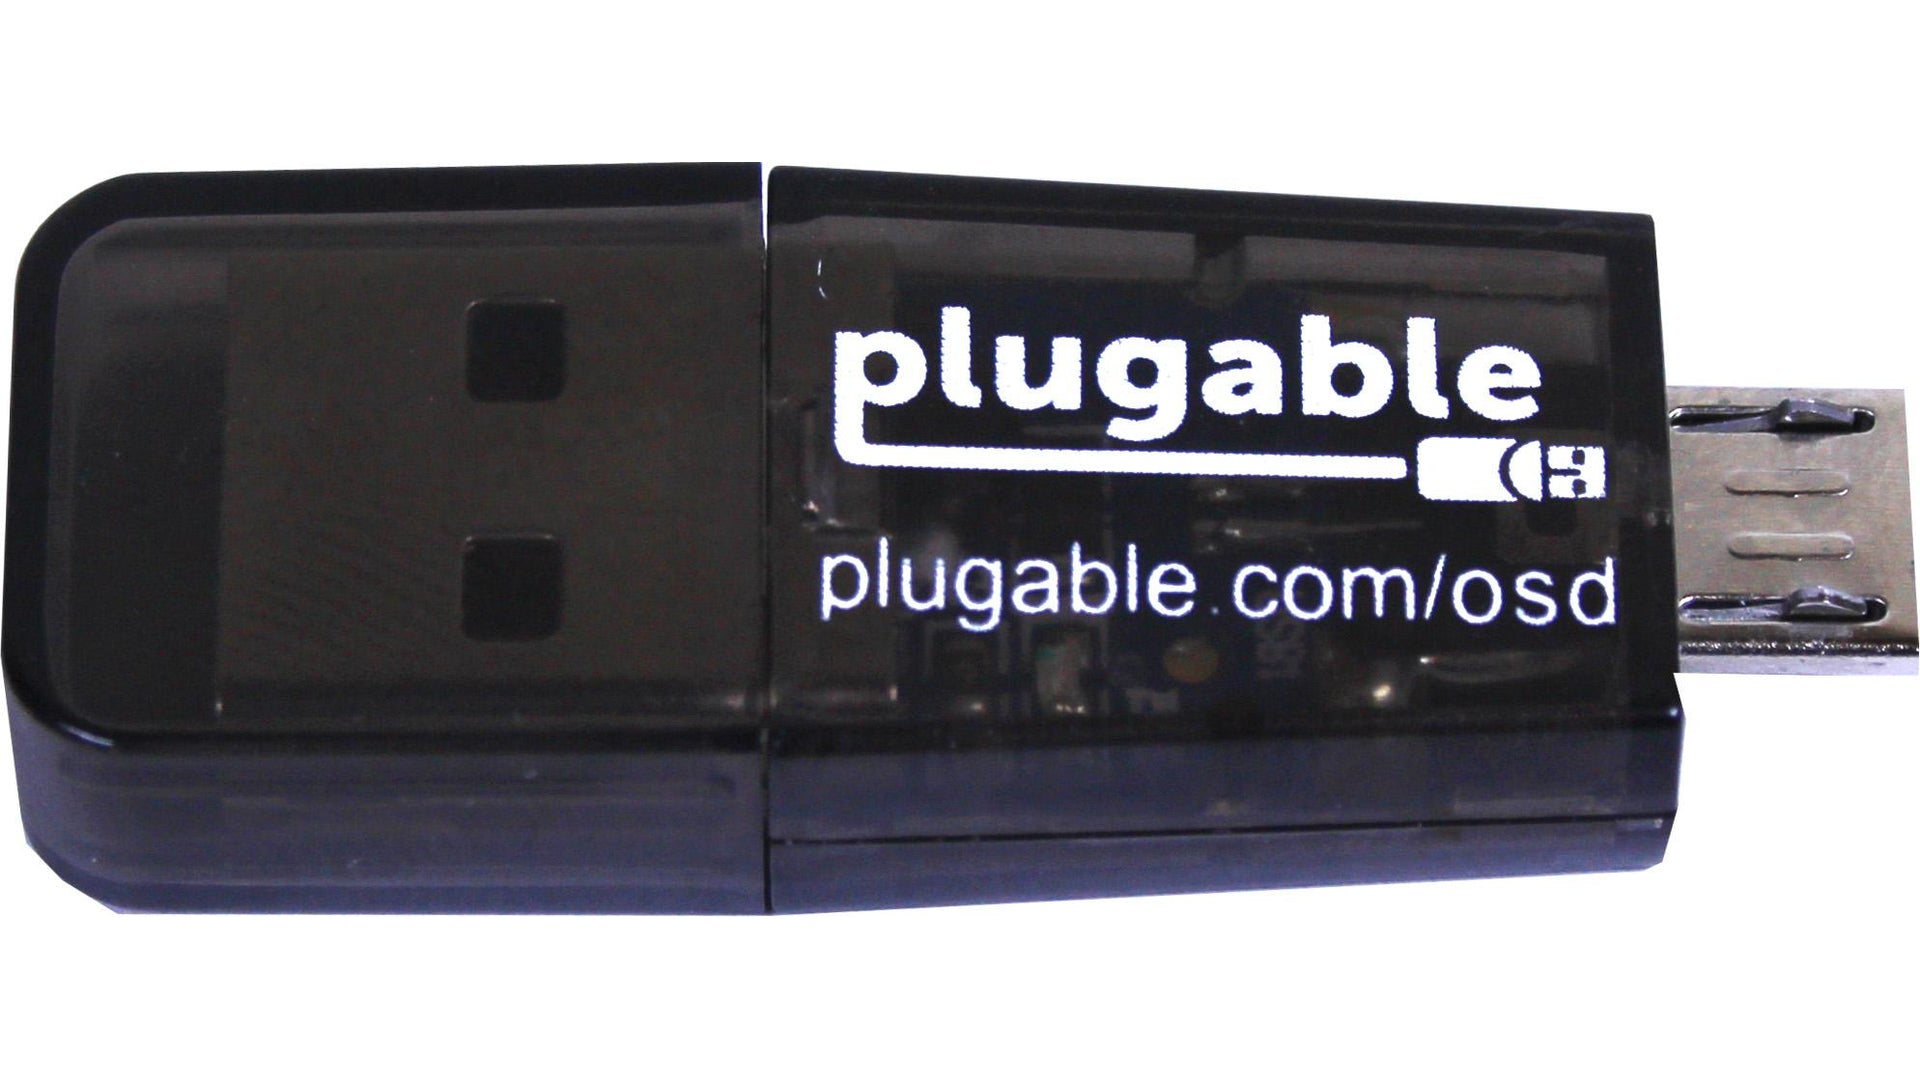 Plugable USB 2.0 MicroSD Card Reader for Phone, Laptop, and Tablet